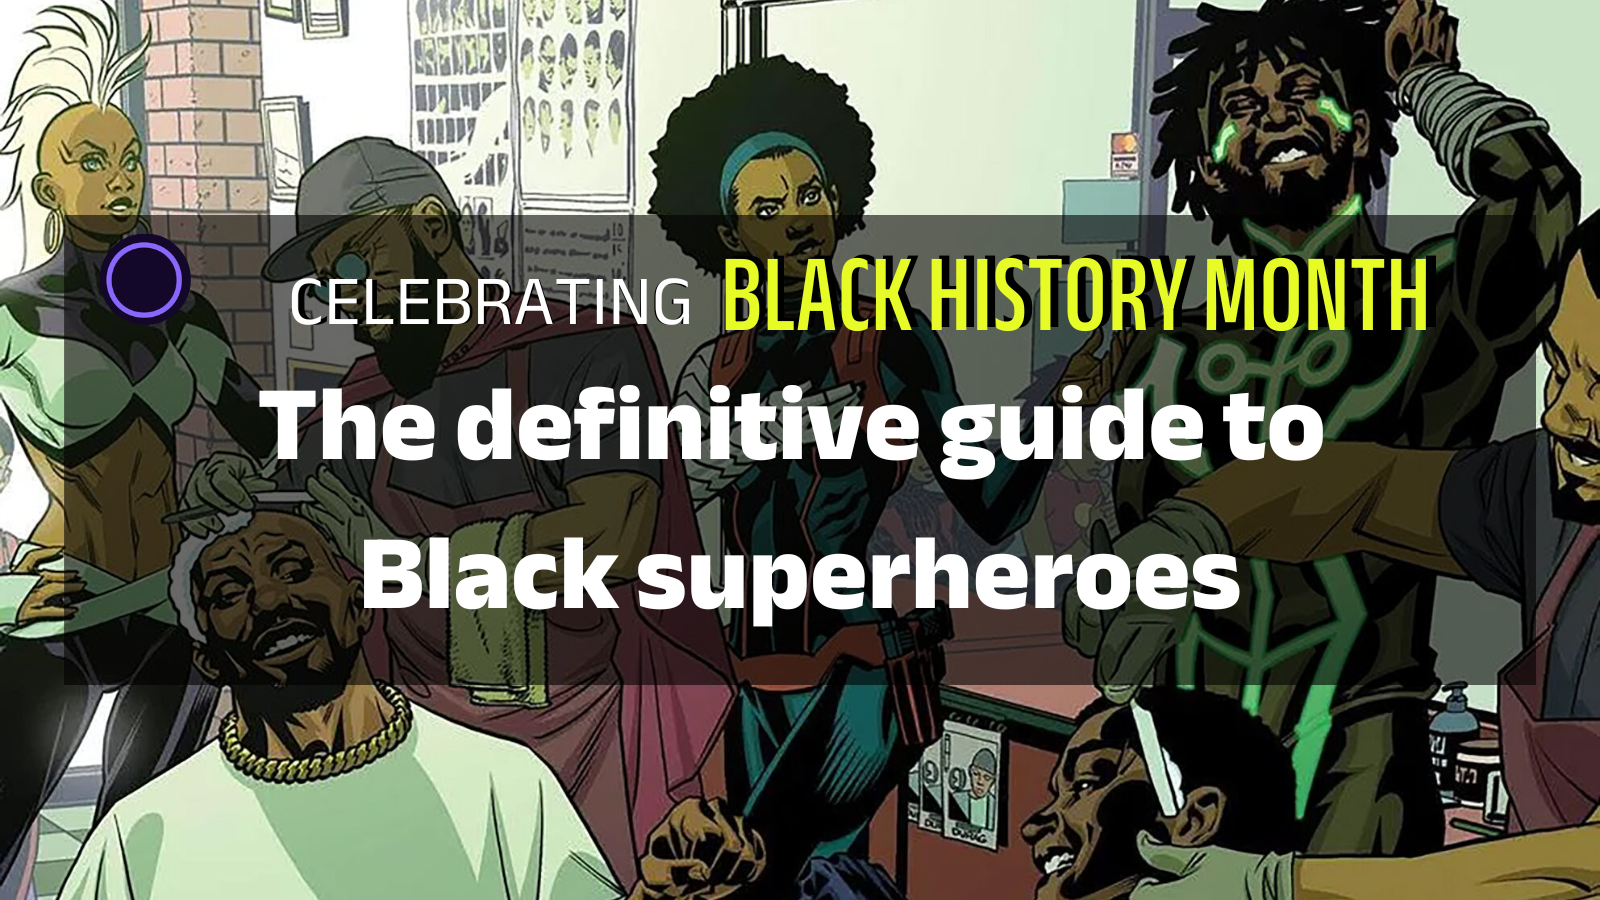 Image for The definitive guide to Black superheroes